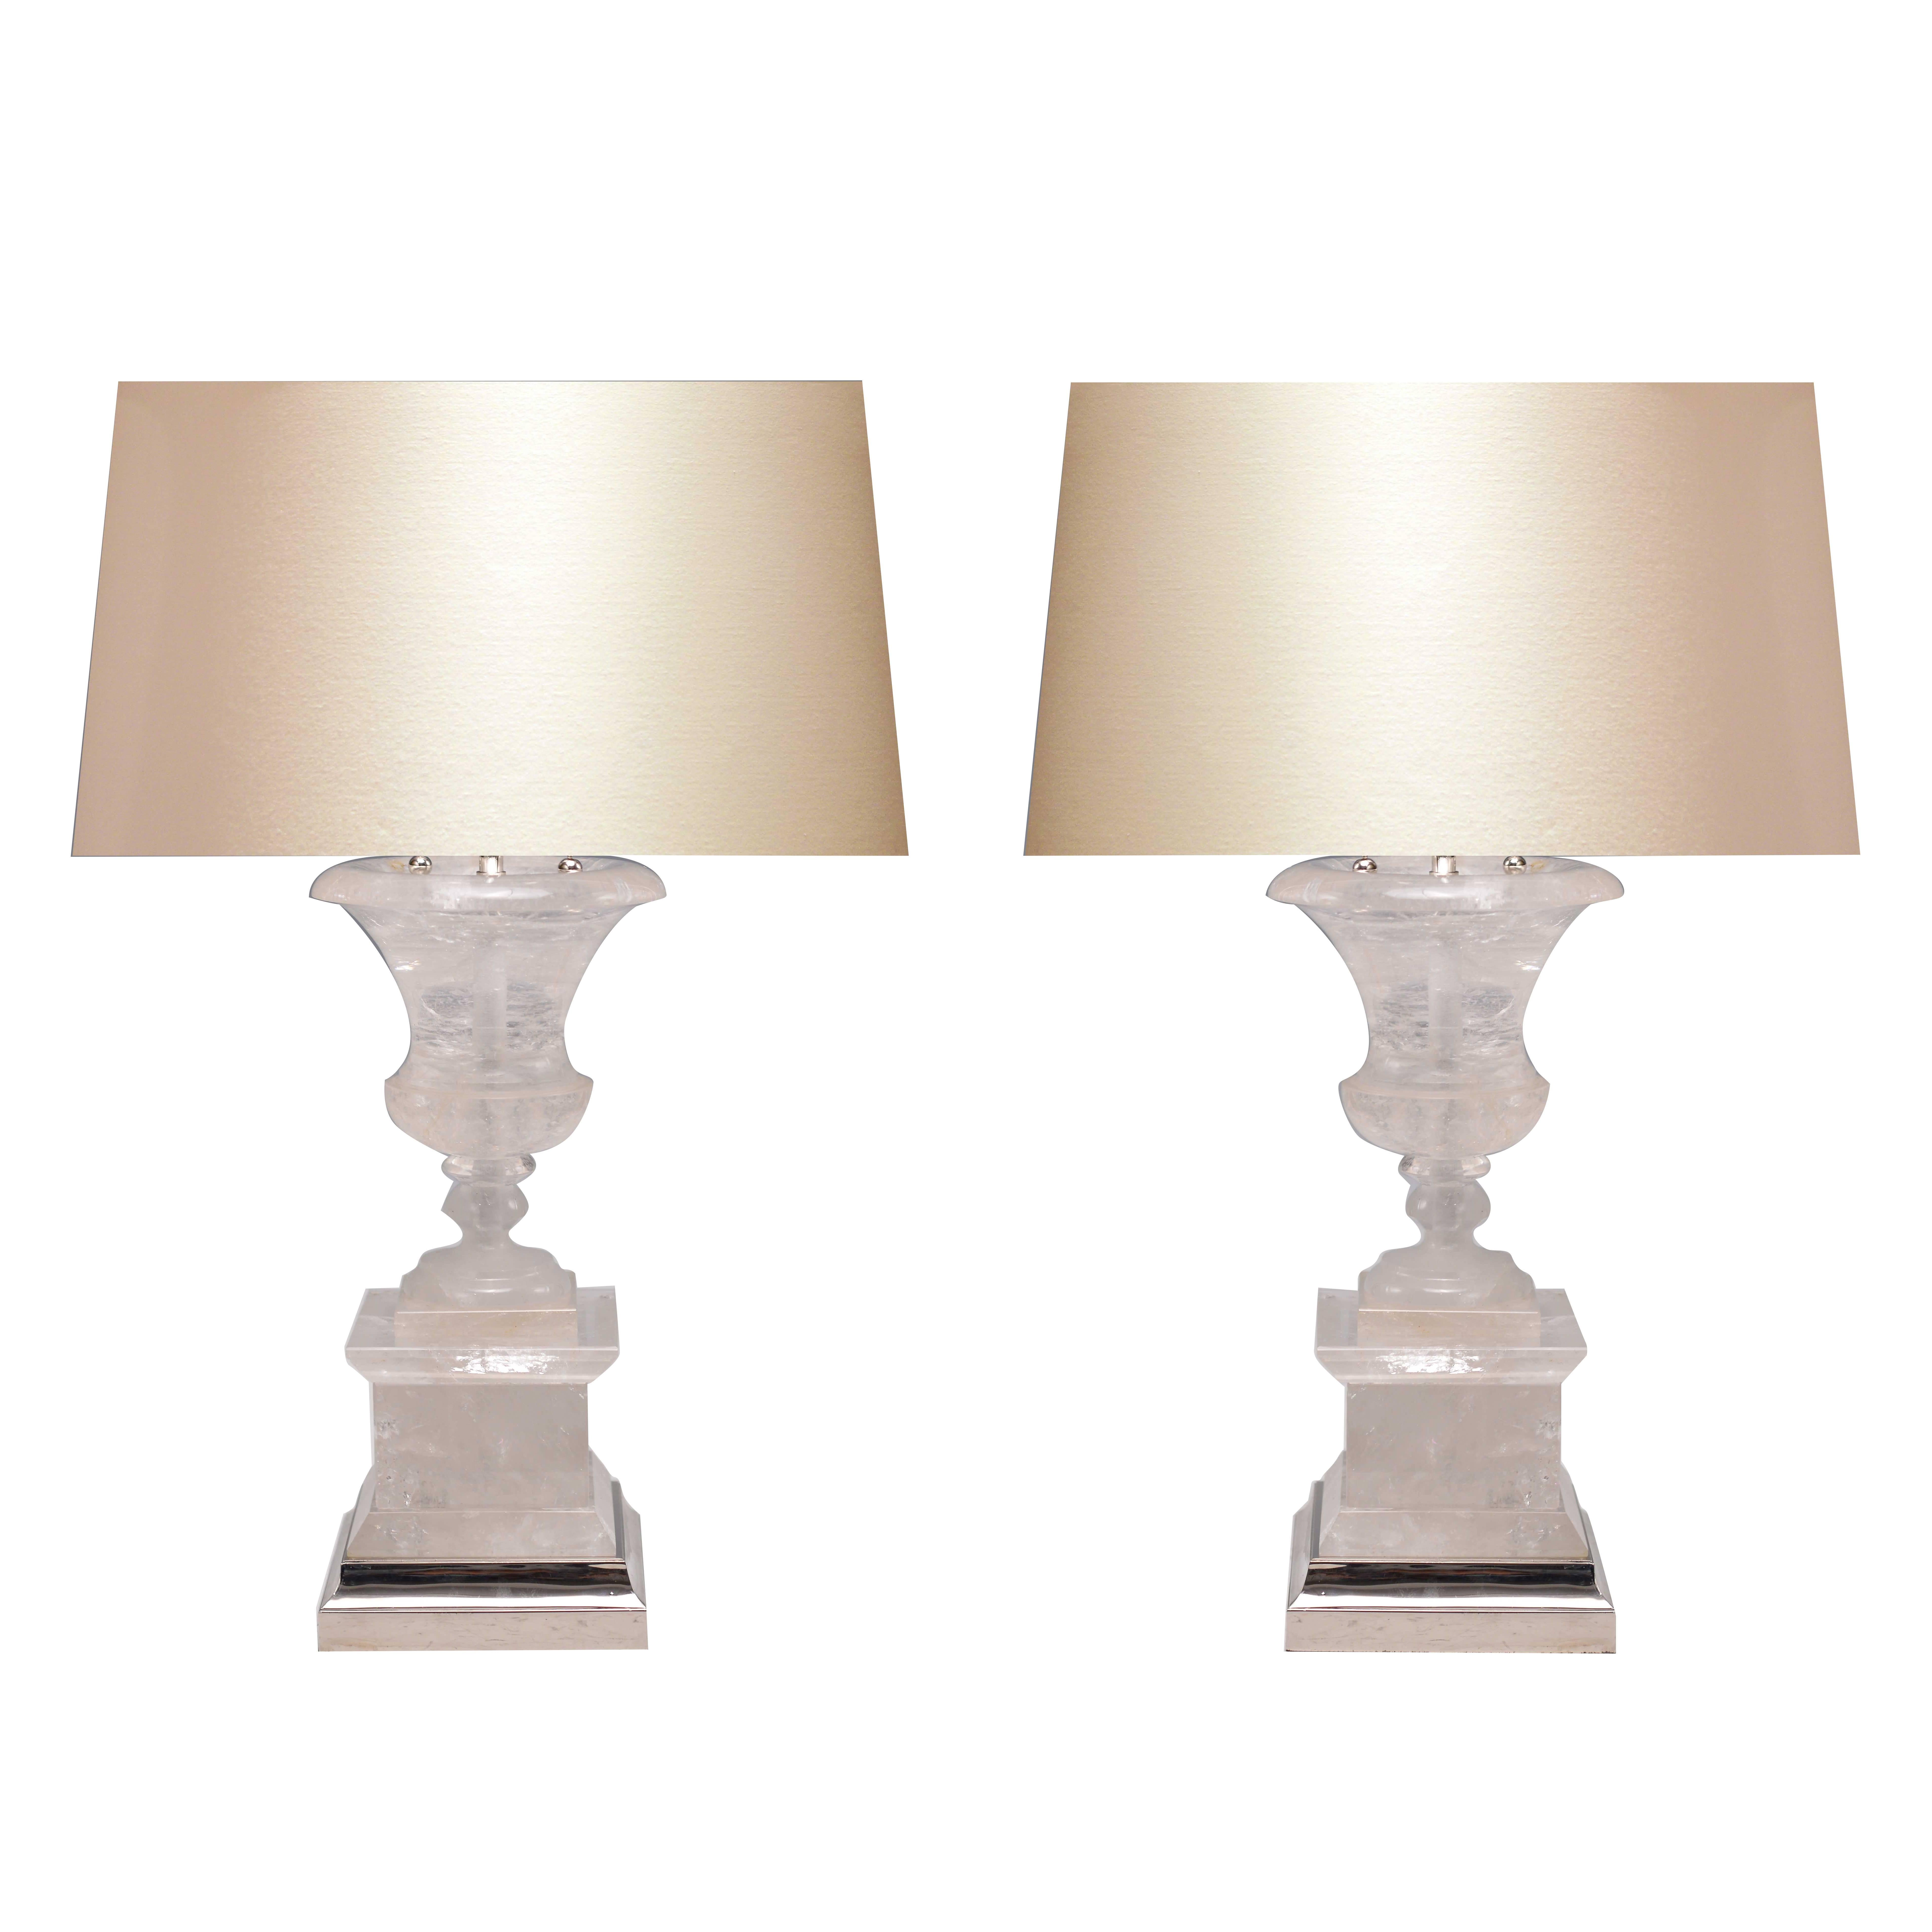 Pair of Fine Carved Rock Crystal Quartz Urn Table Lamps For Sale